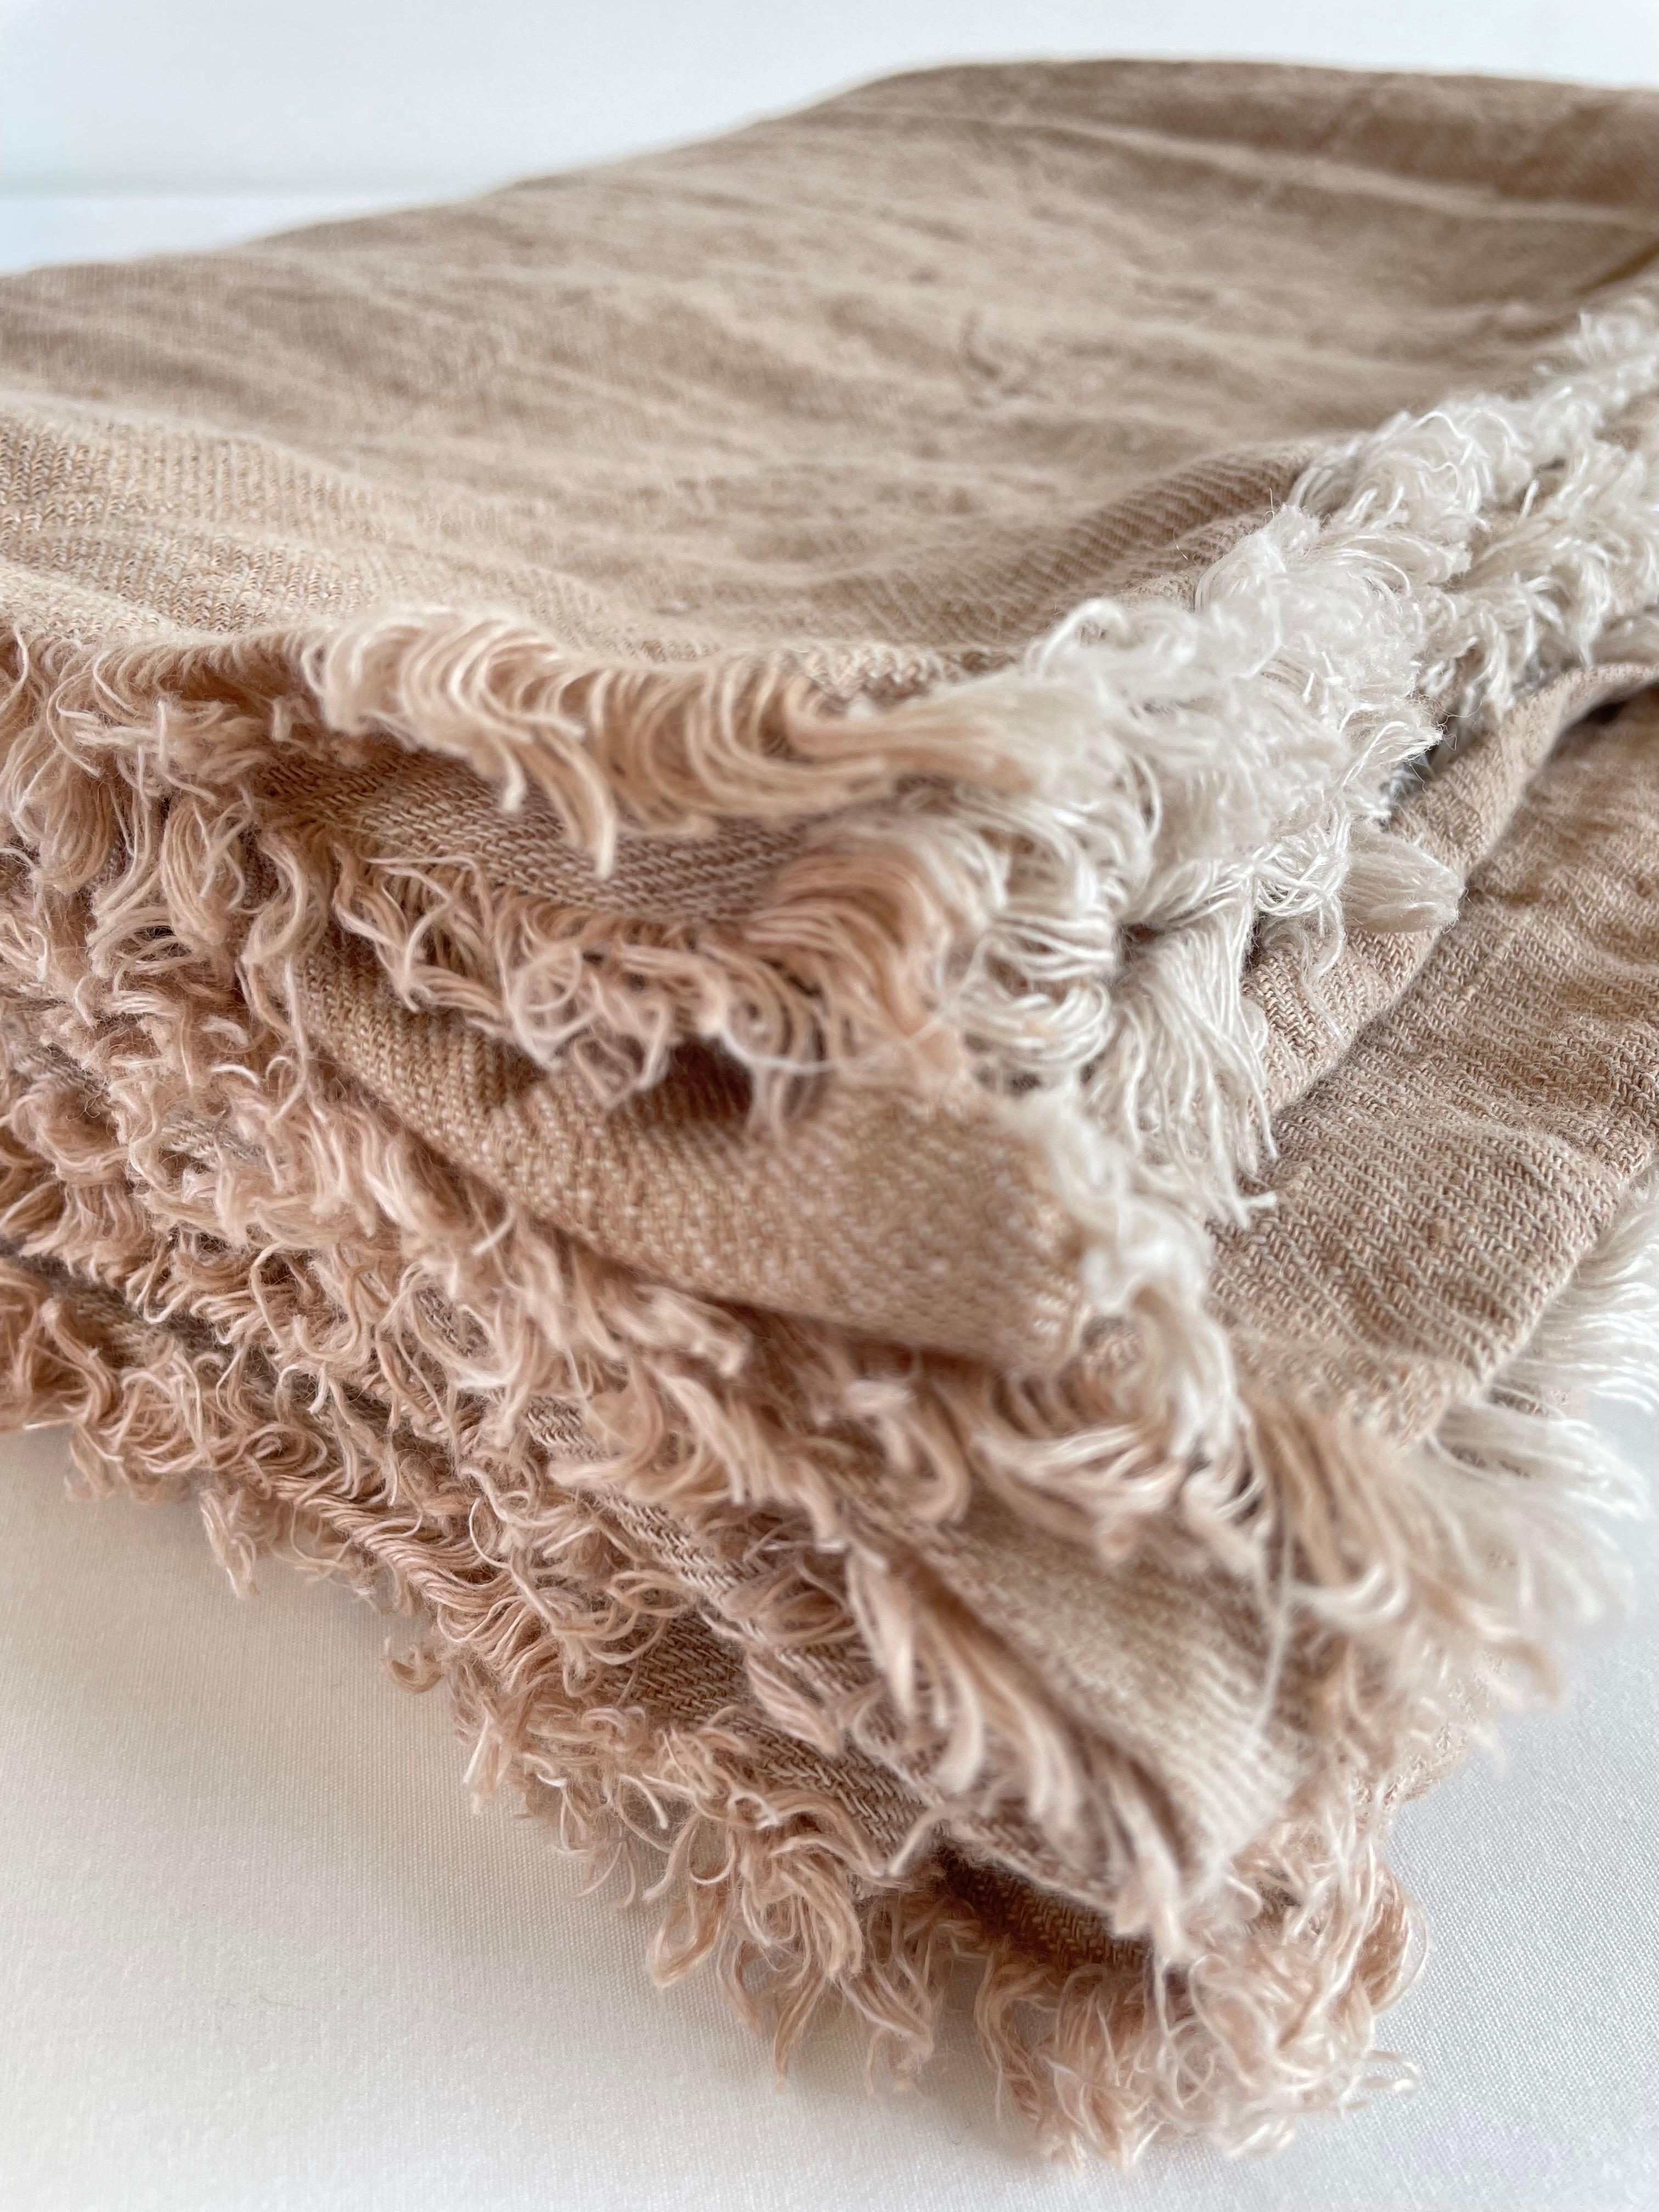 Stone Washed French Linen Throw in Nude Blush Color In New Condition For Sale In Brea, CA